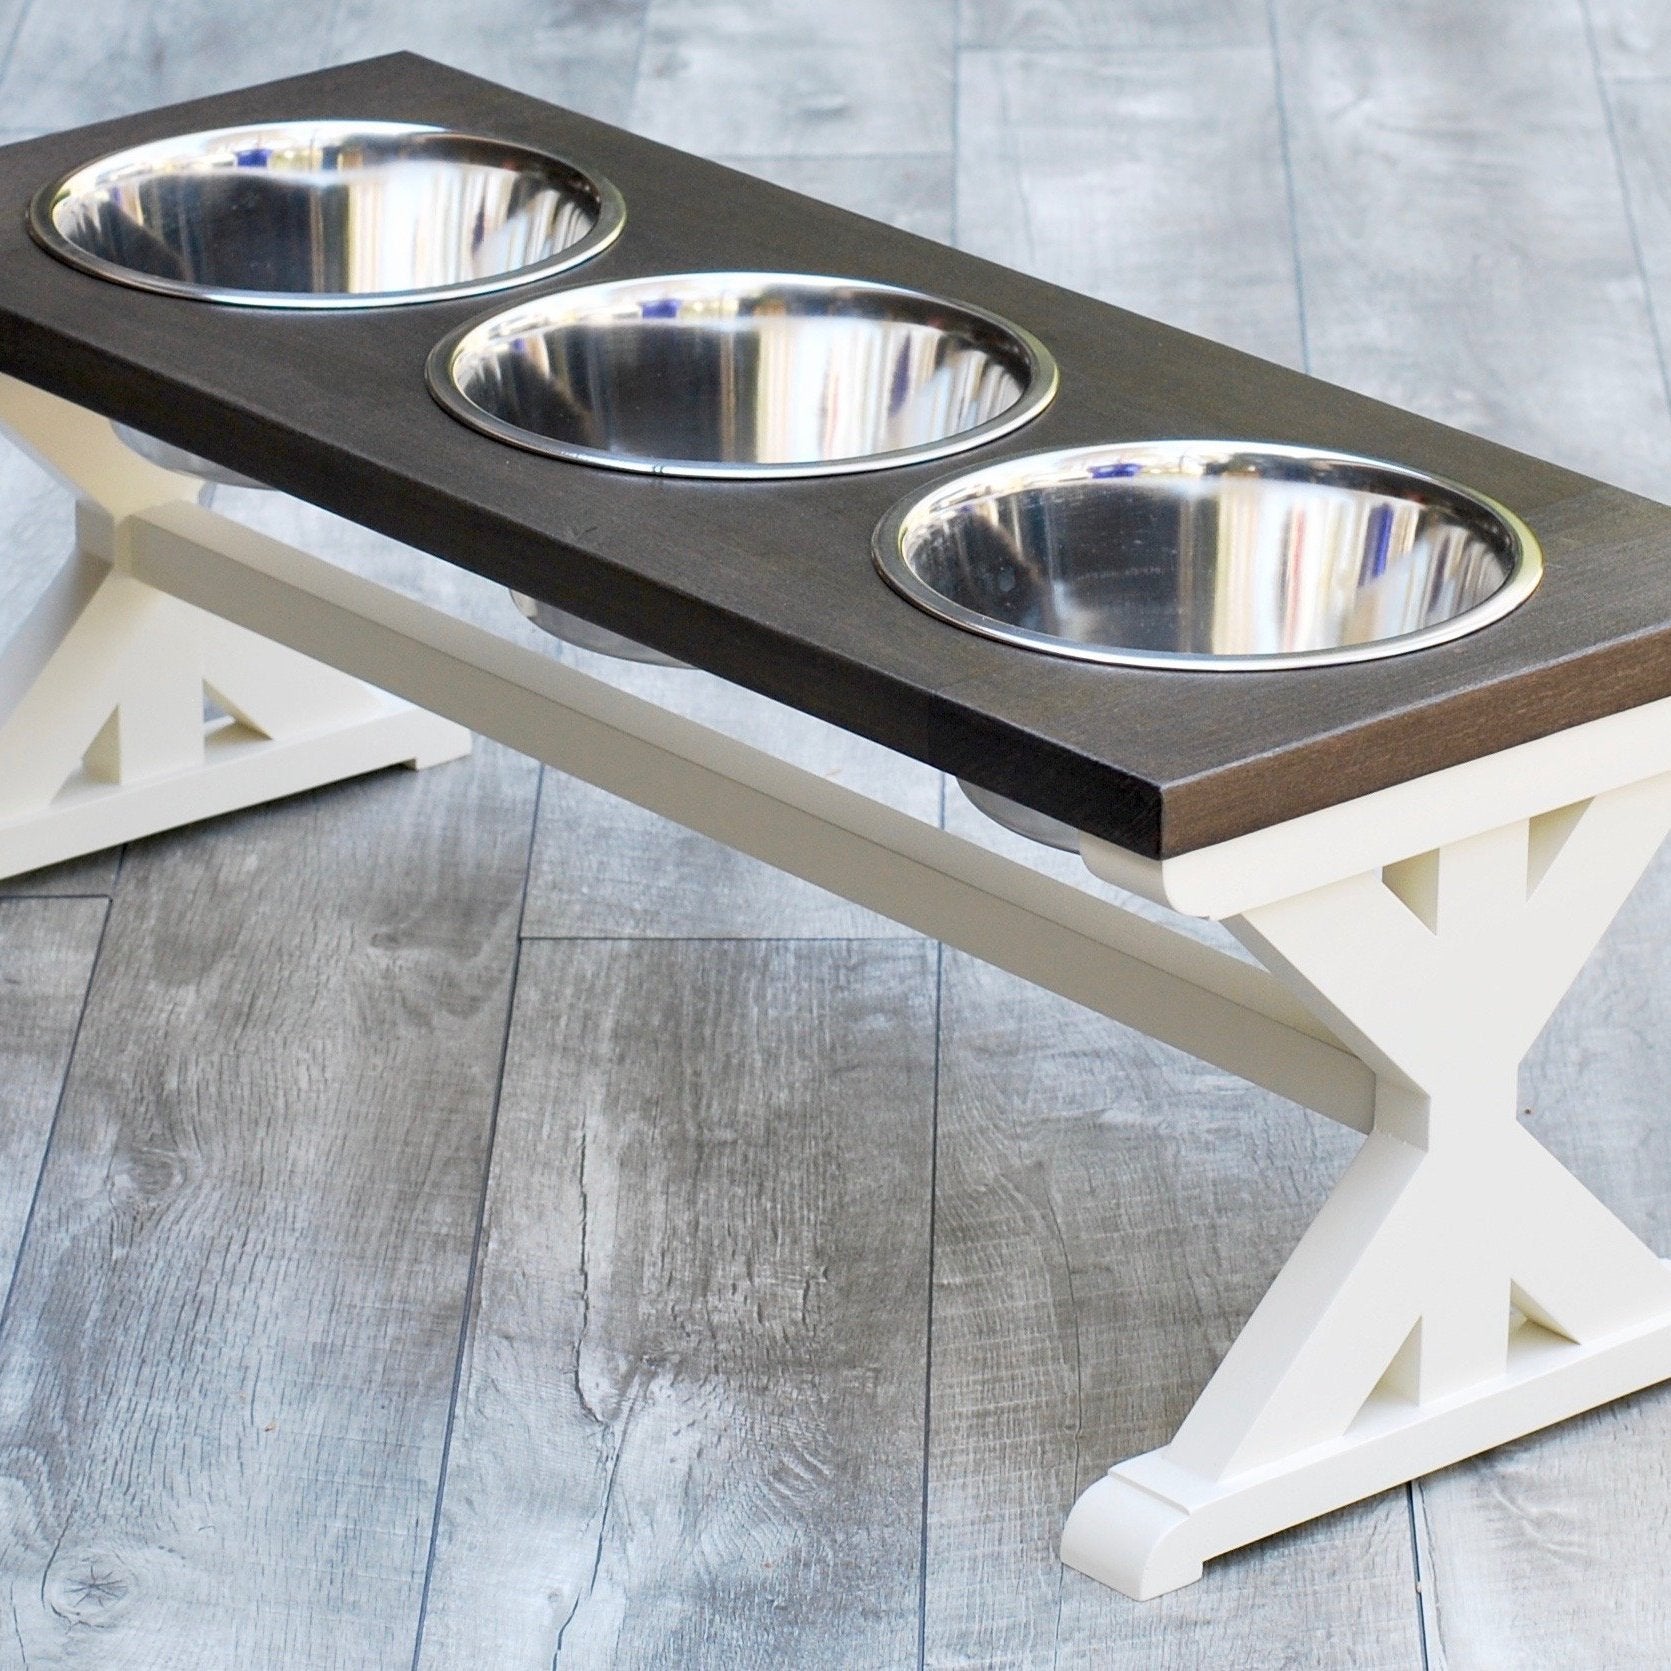 Oak top - Large Elevated Dog Bowl Stand, 3 Bowl Dog Stand, Raised